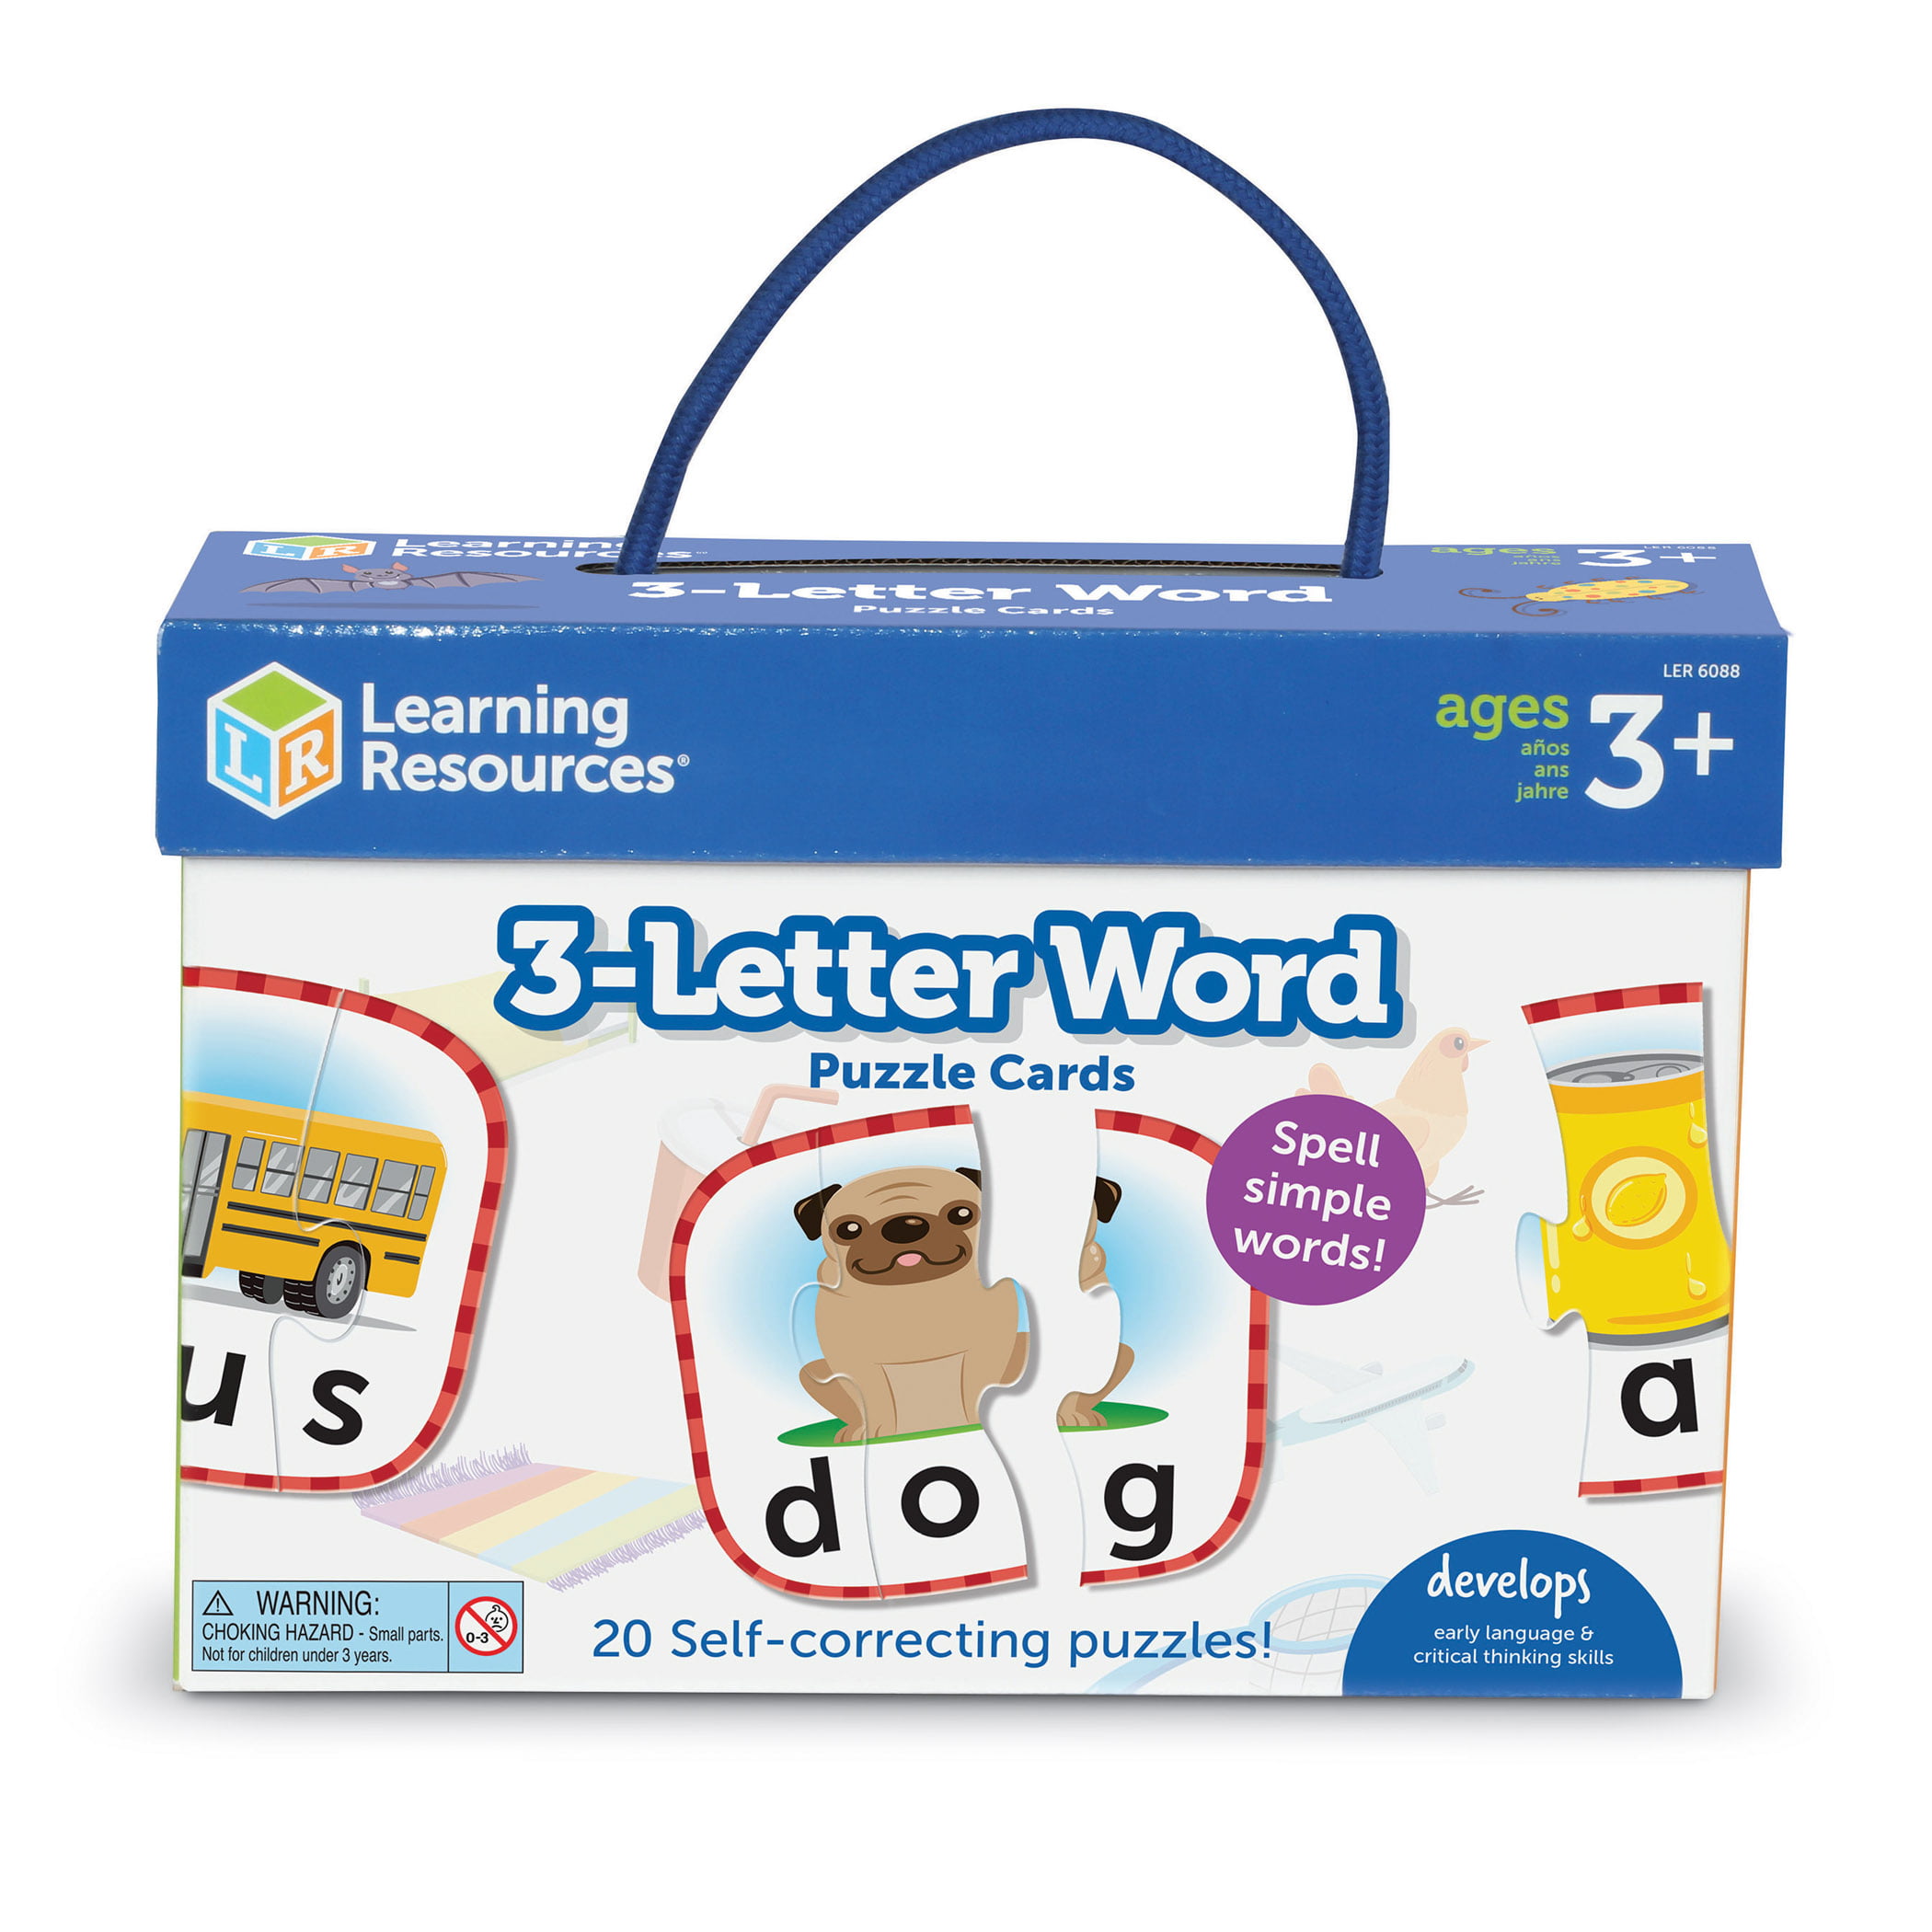 Learning Resources 3 Letter Word Puzzle Card Make Learning Fun For Kids LER6088 